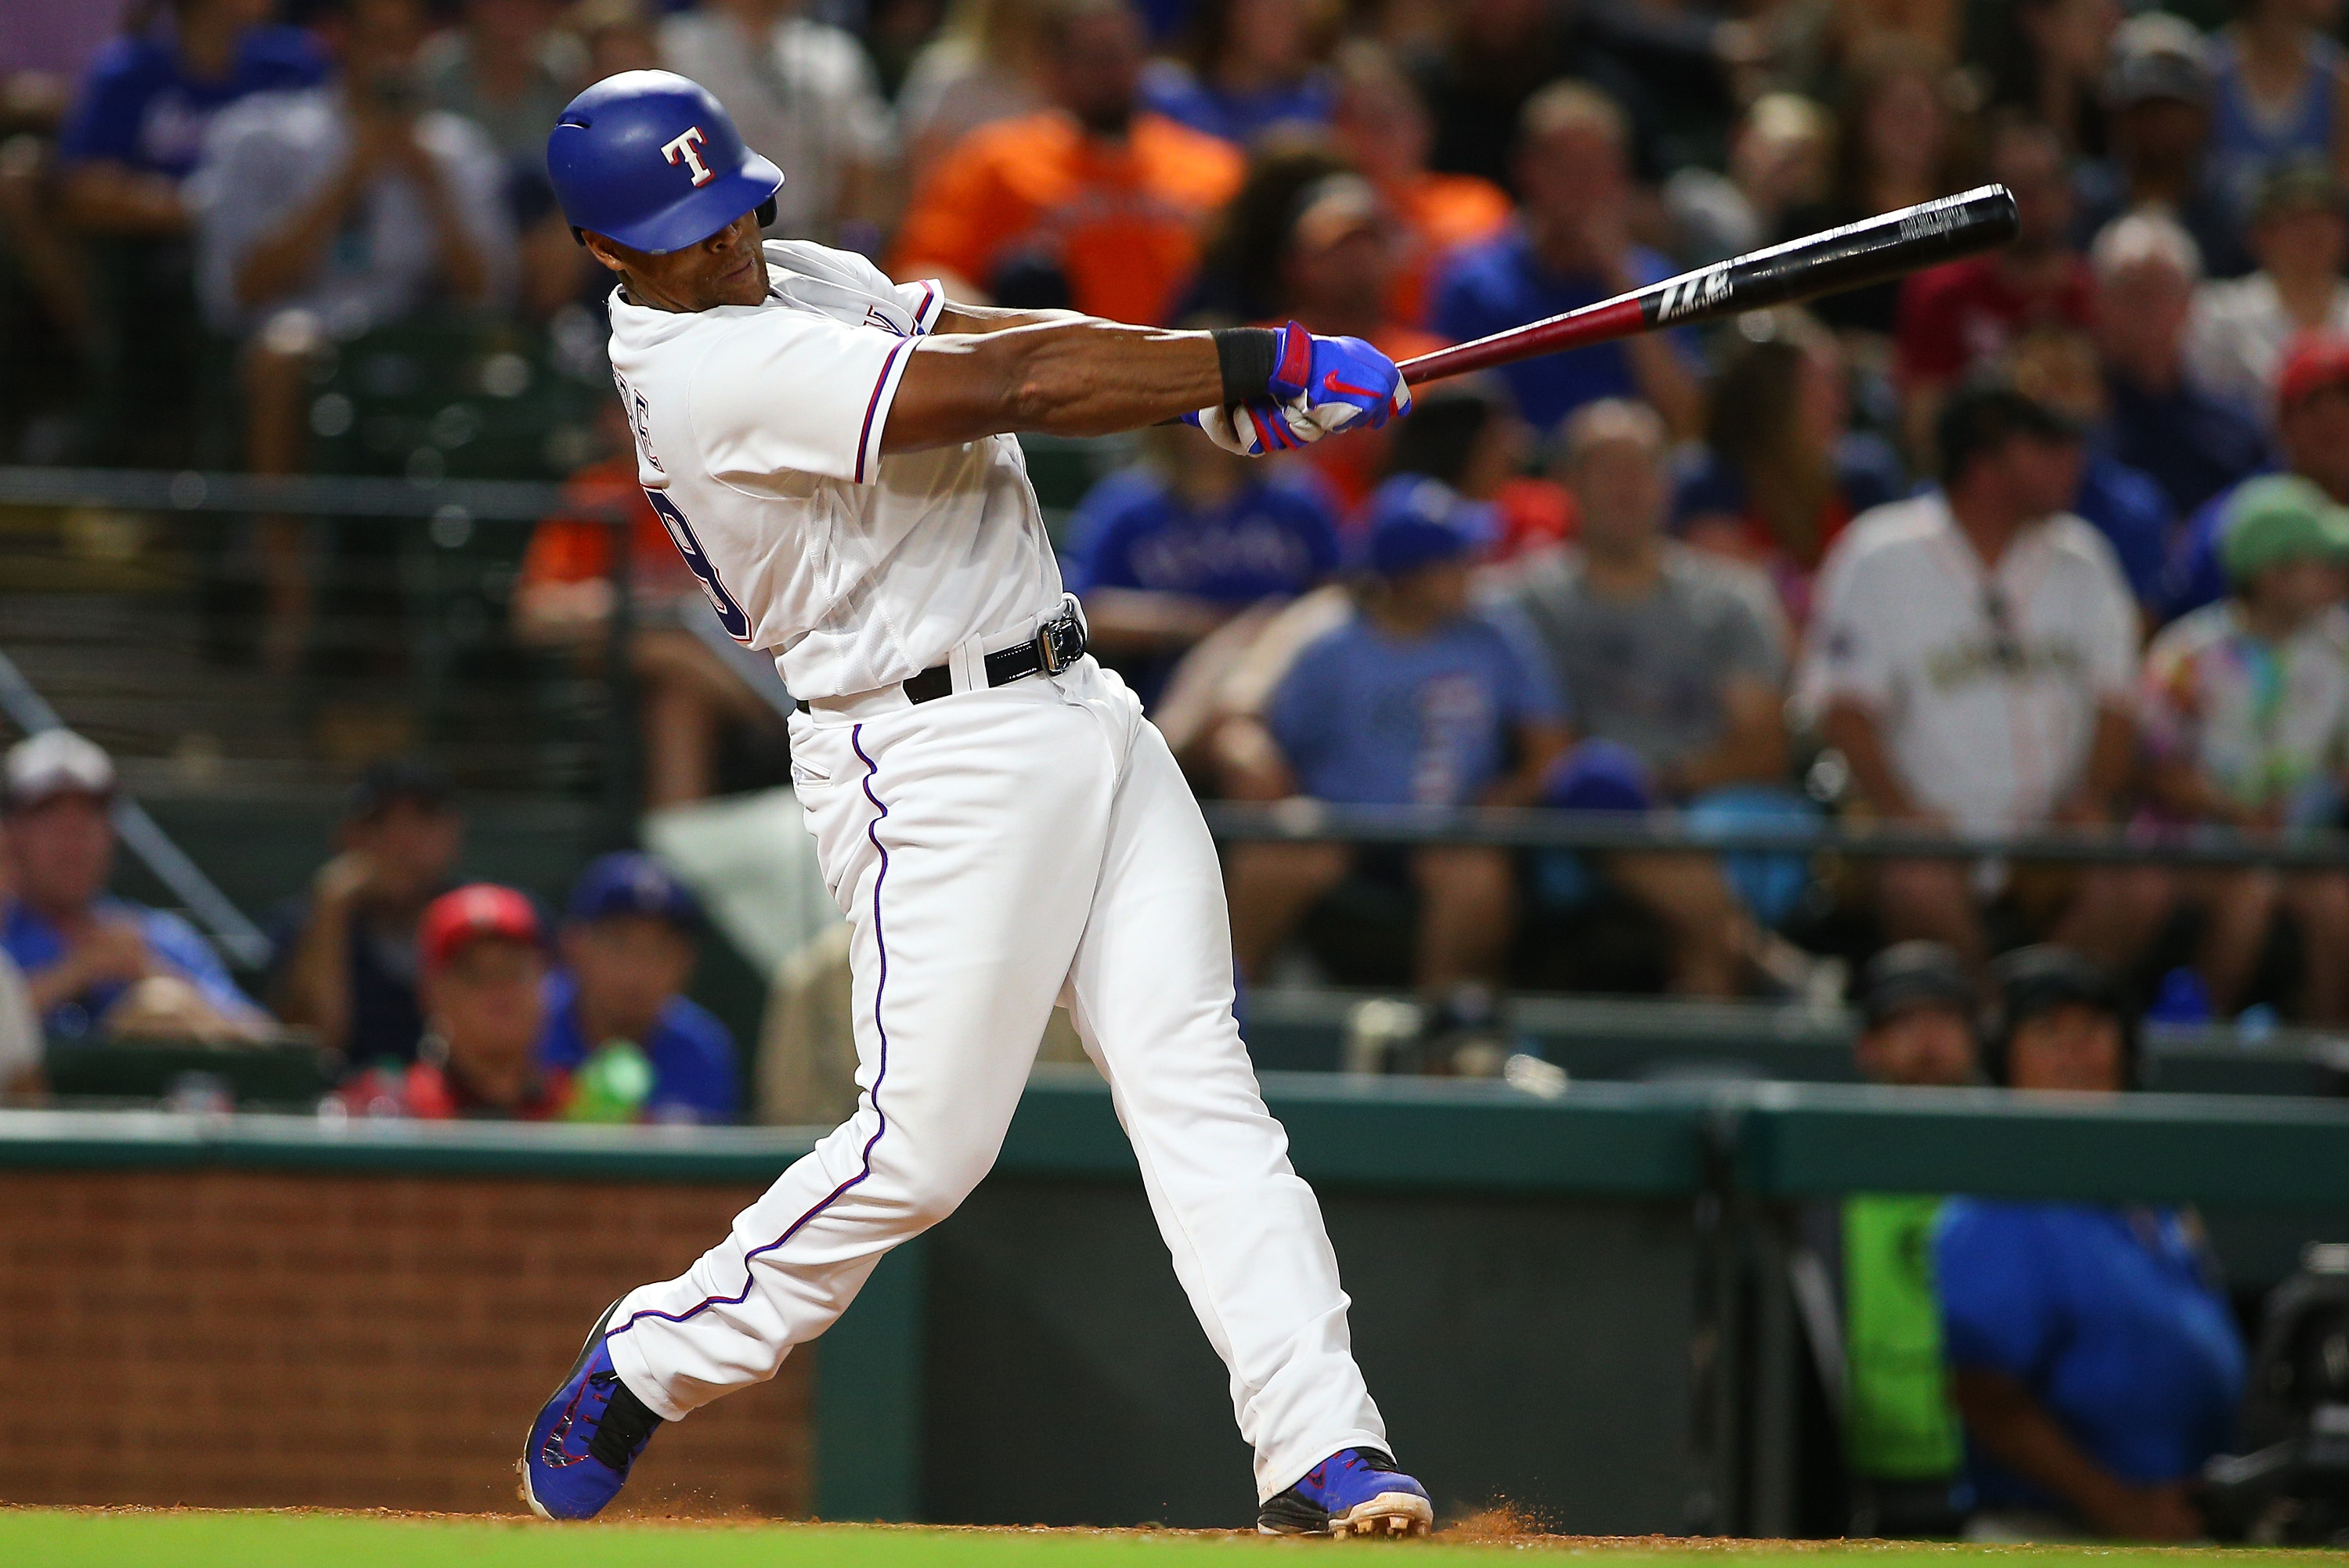 Rangers to be cautious with Adrian Beltre; return Thursday is likely